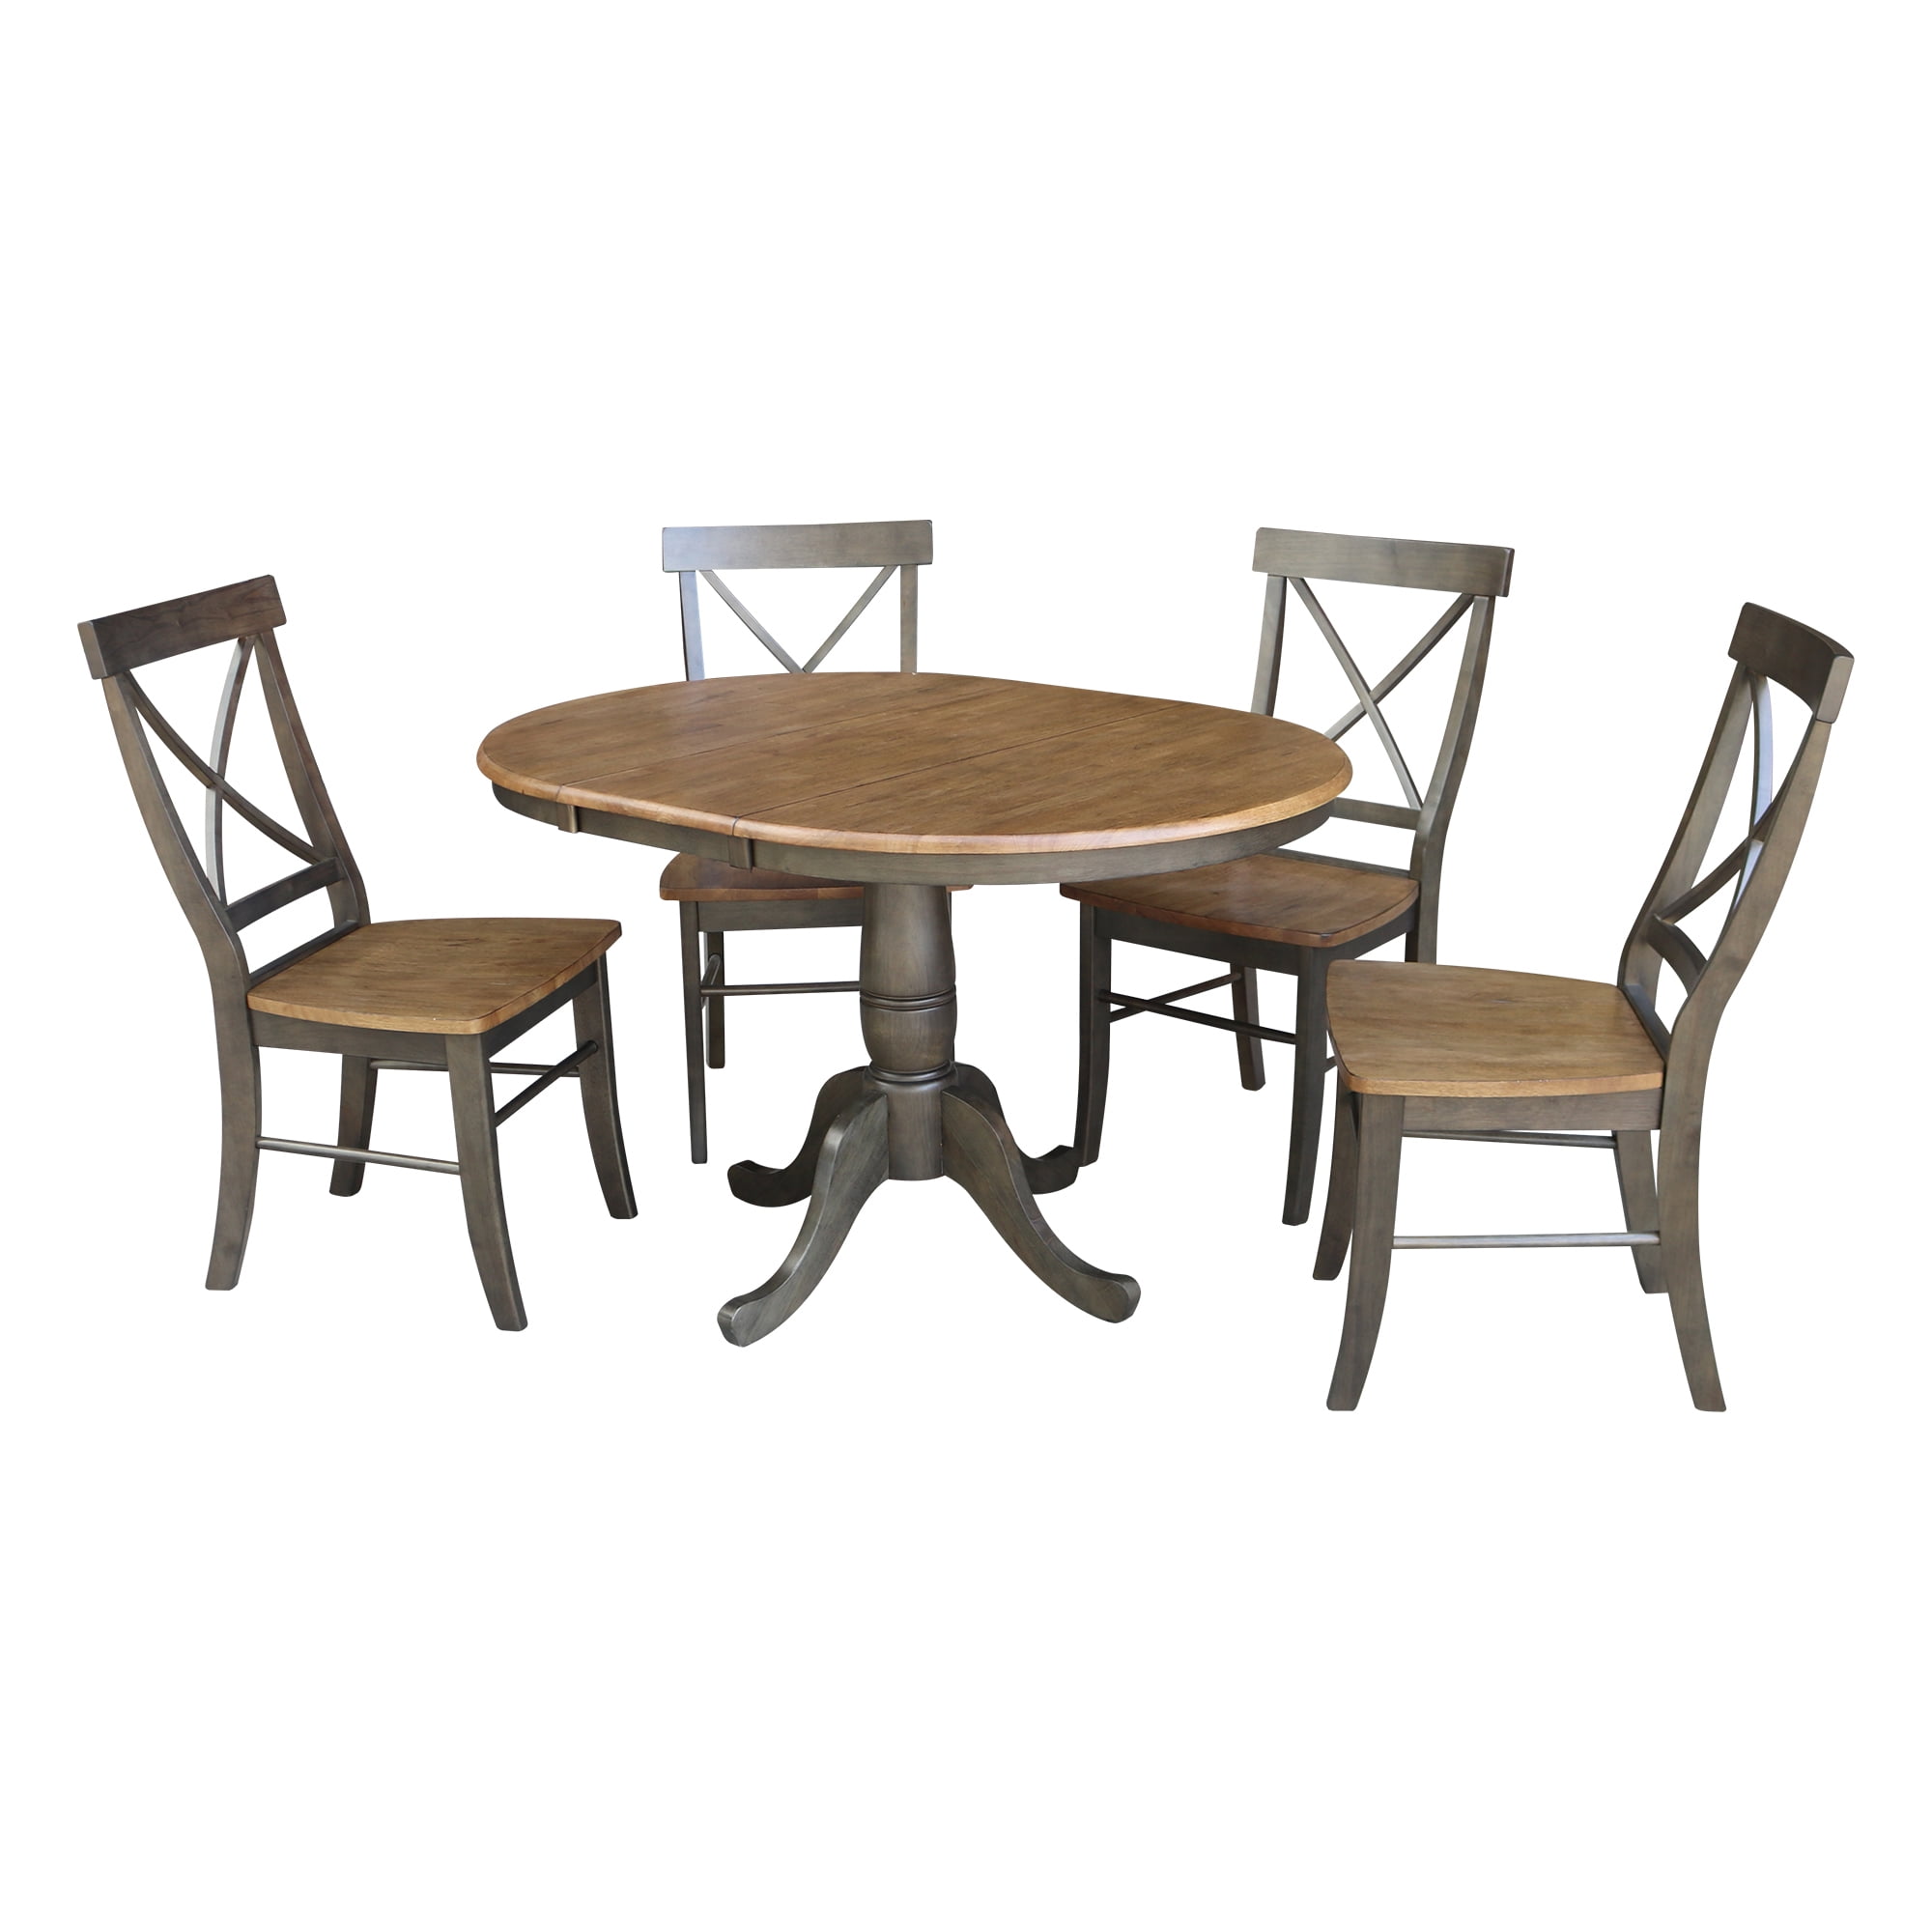 36" Round Extension Dining Table with 4 Chairs - Walmart.com - Walmart.com